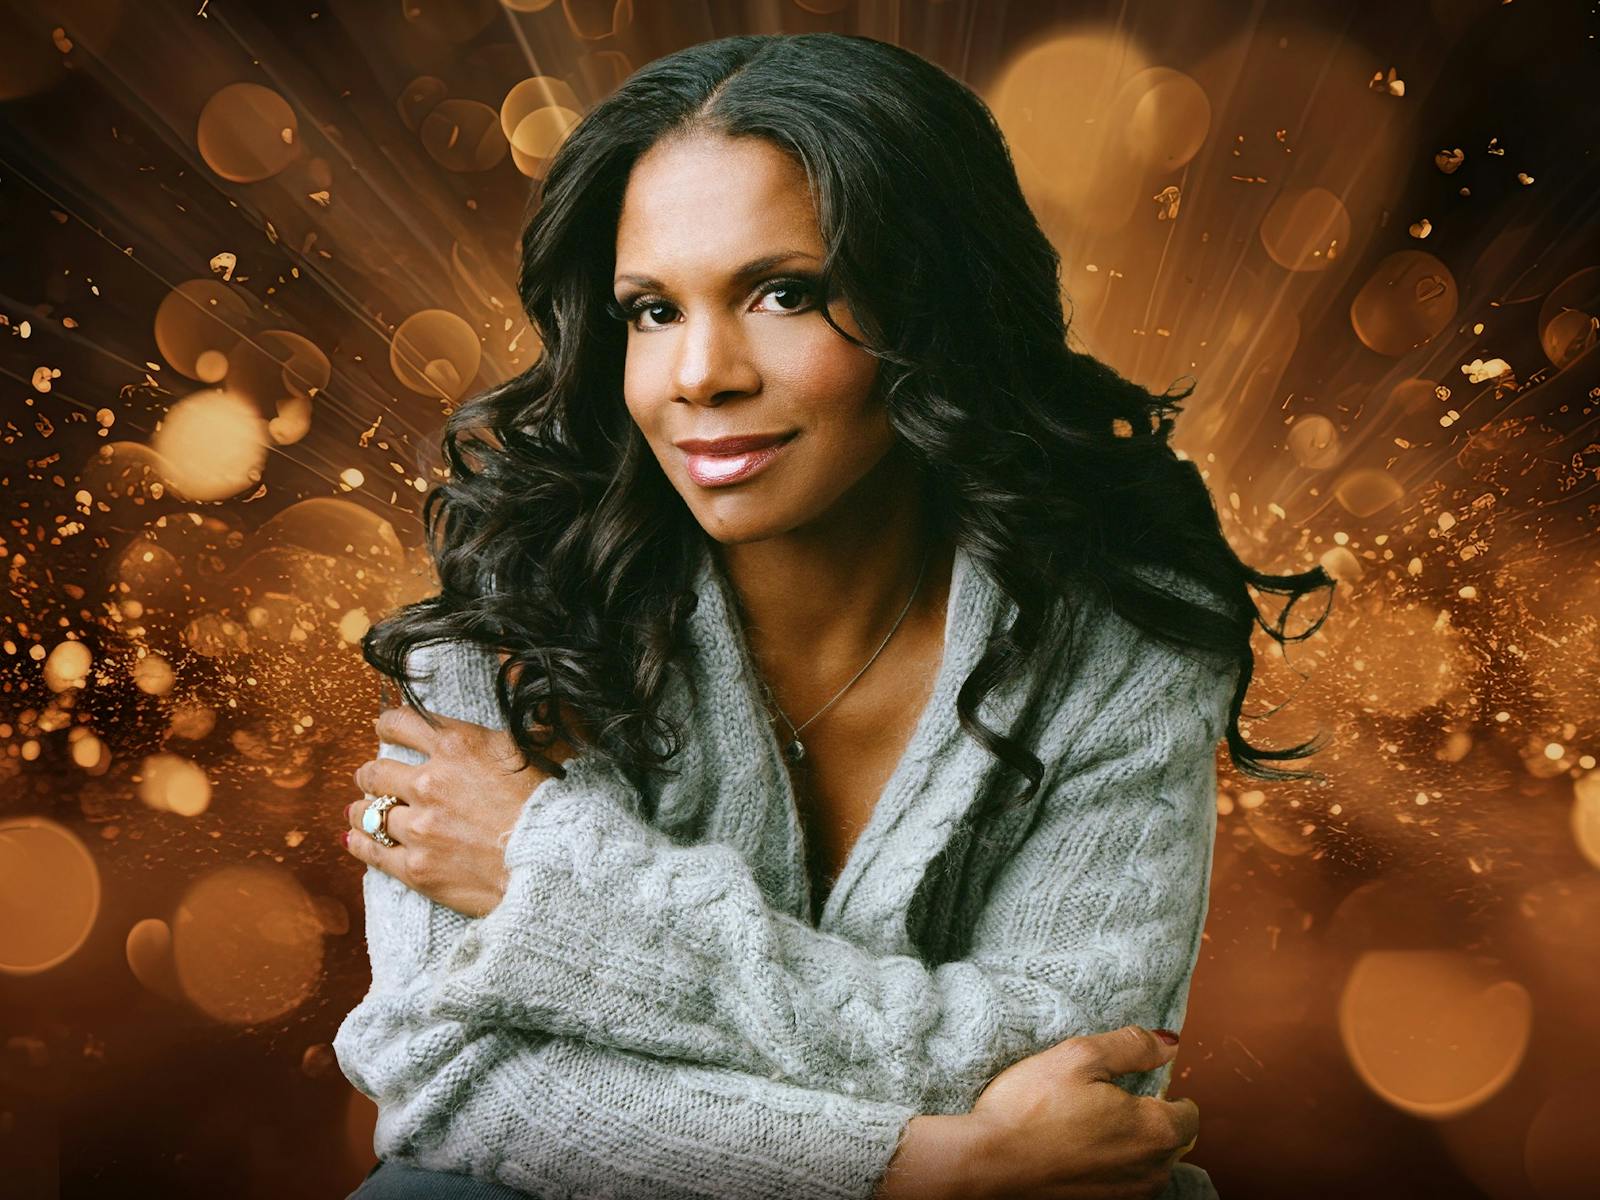 Image for Audra McDonald in Concert